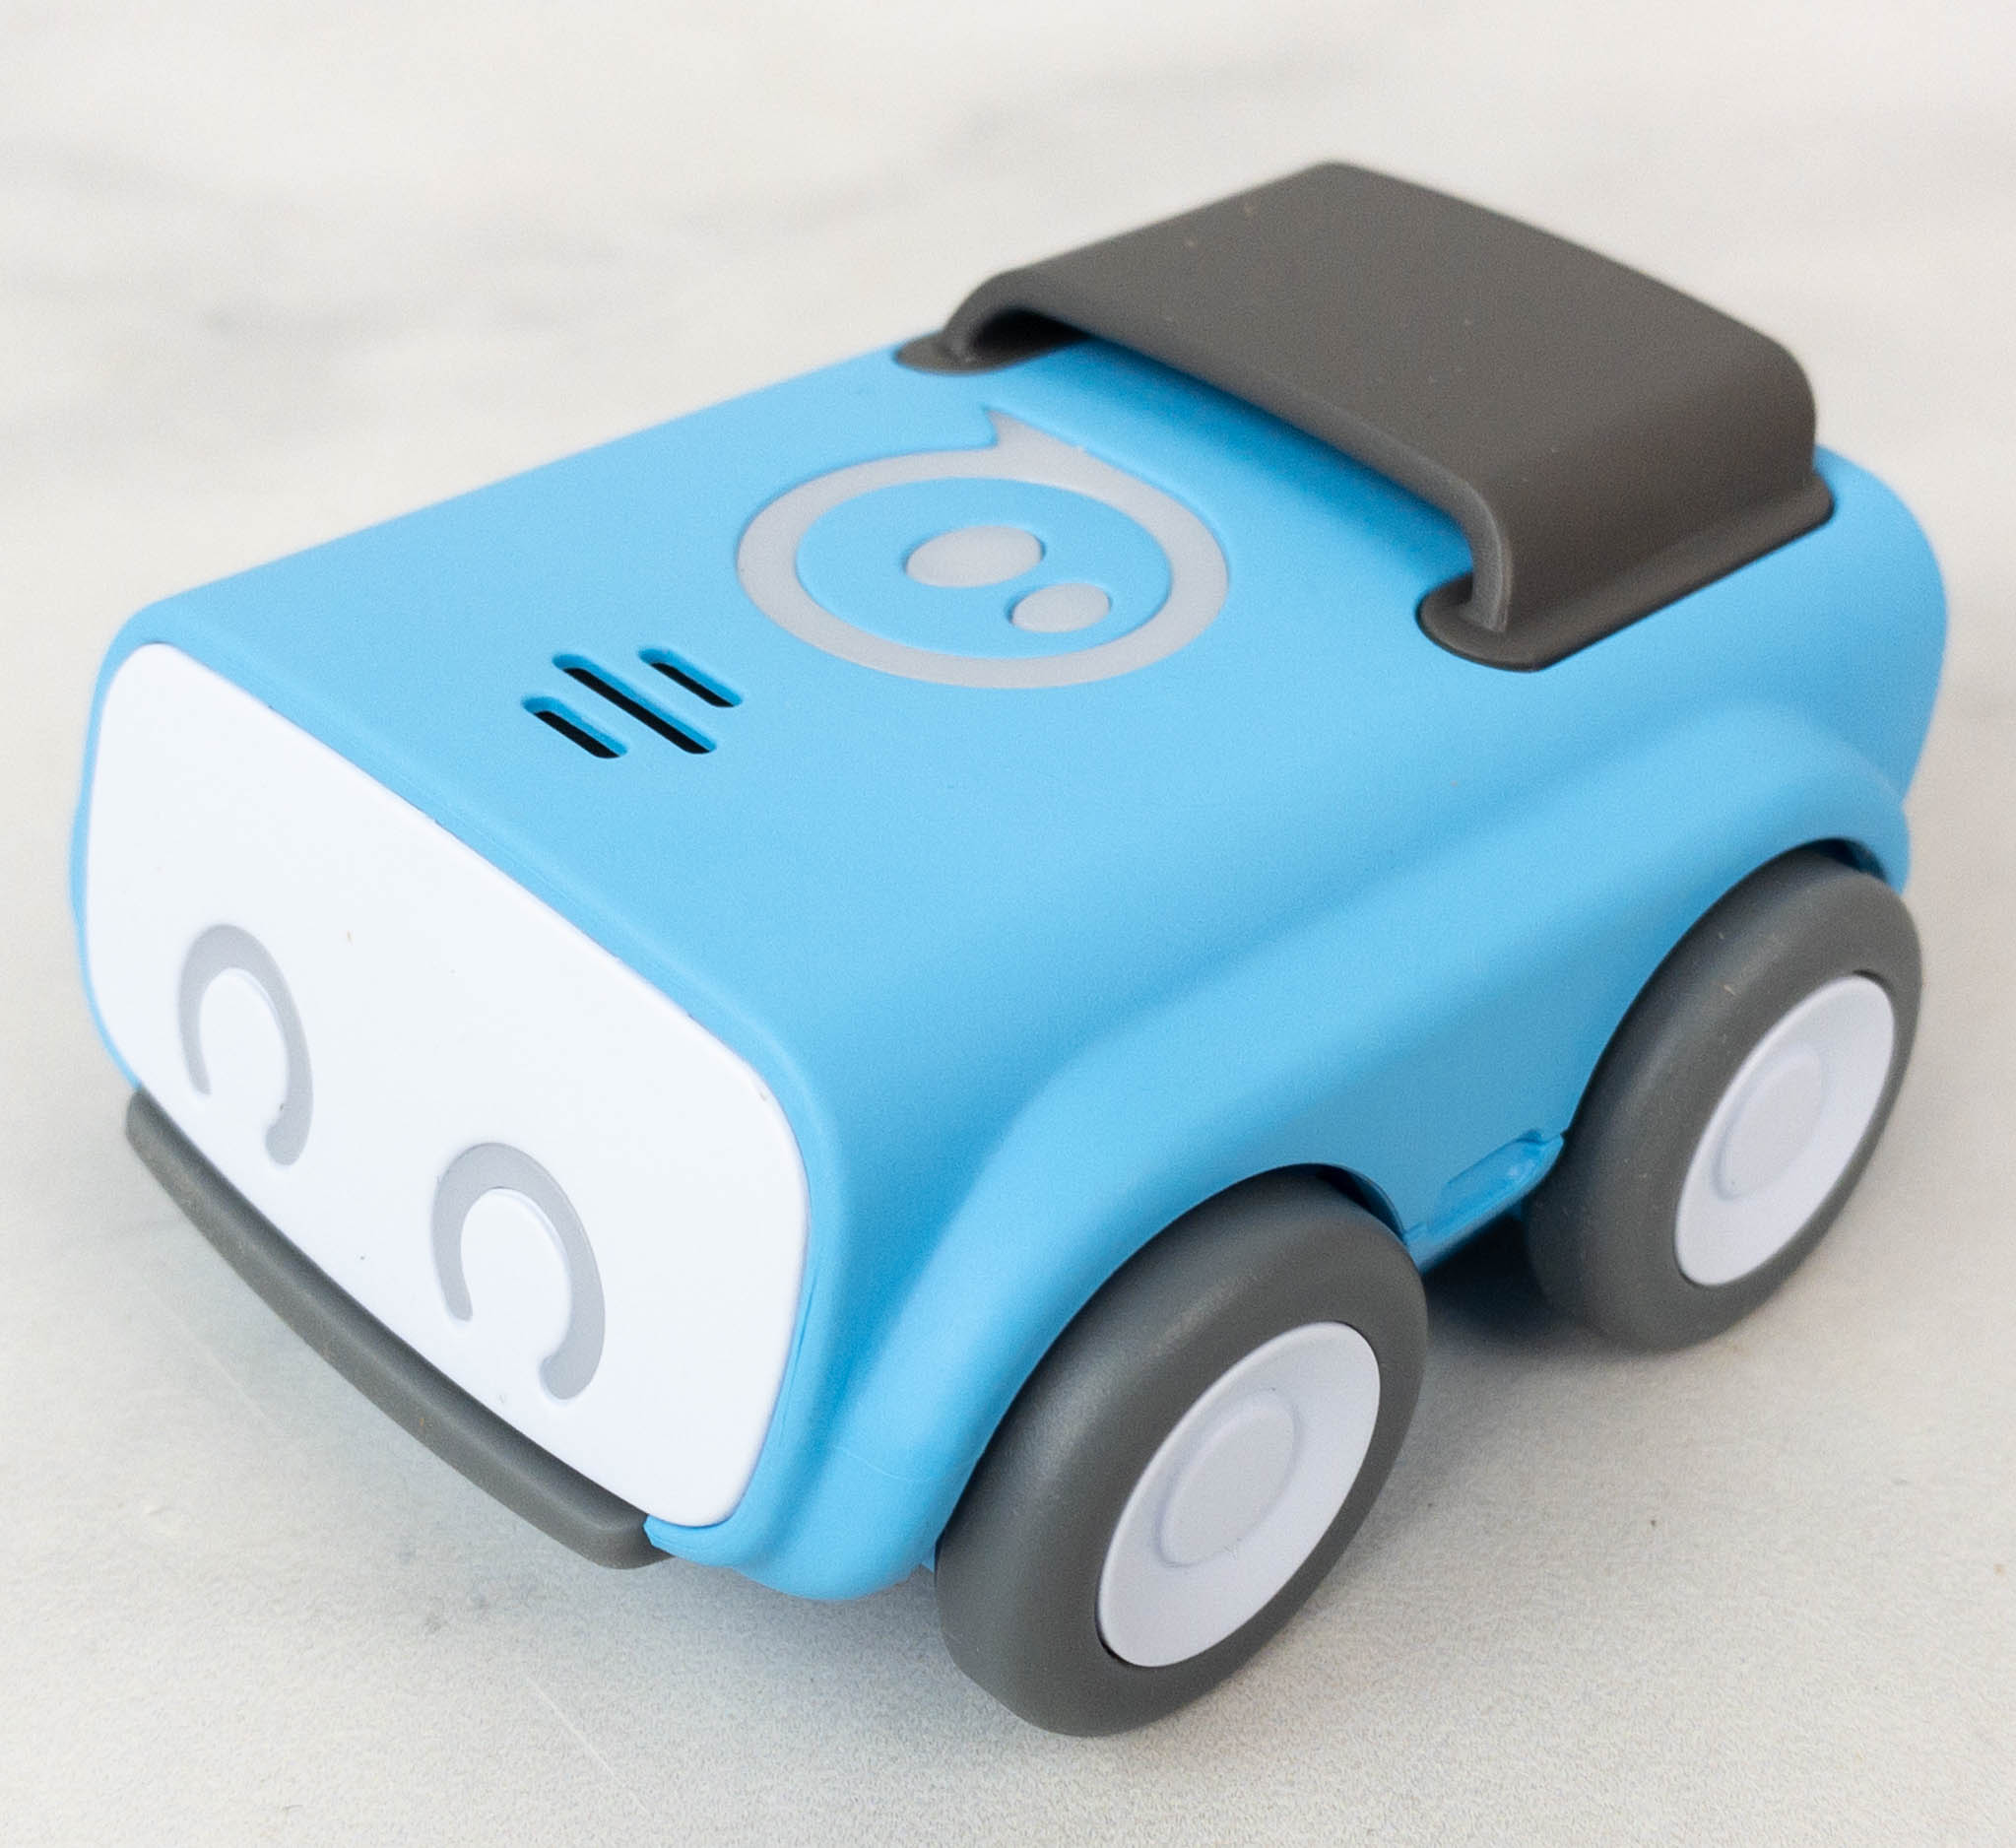 Sphero indi Class Pack: What's in the box? Learn all about these screenless  learning robots for kids 